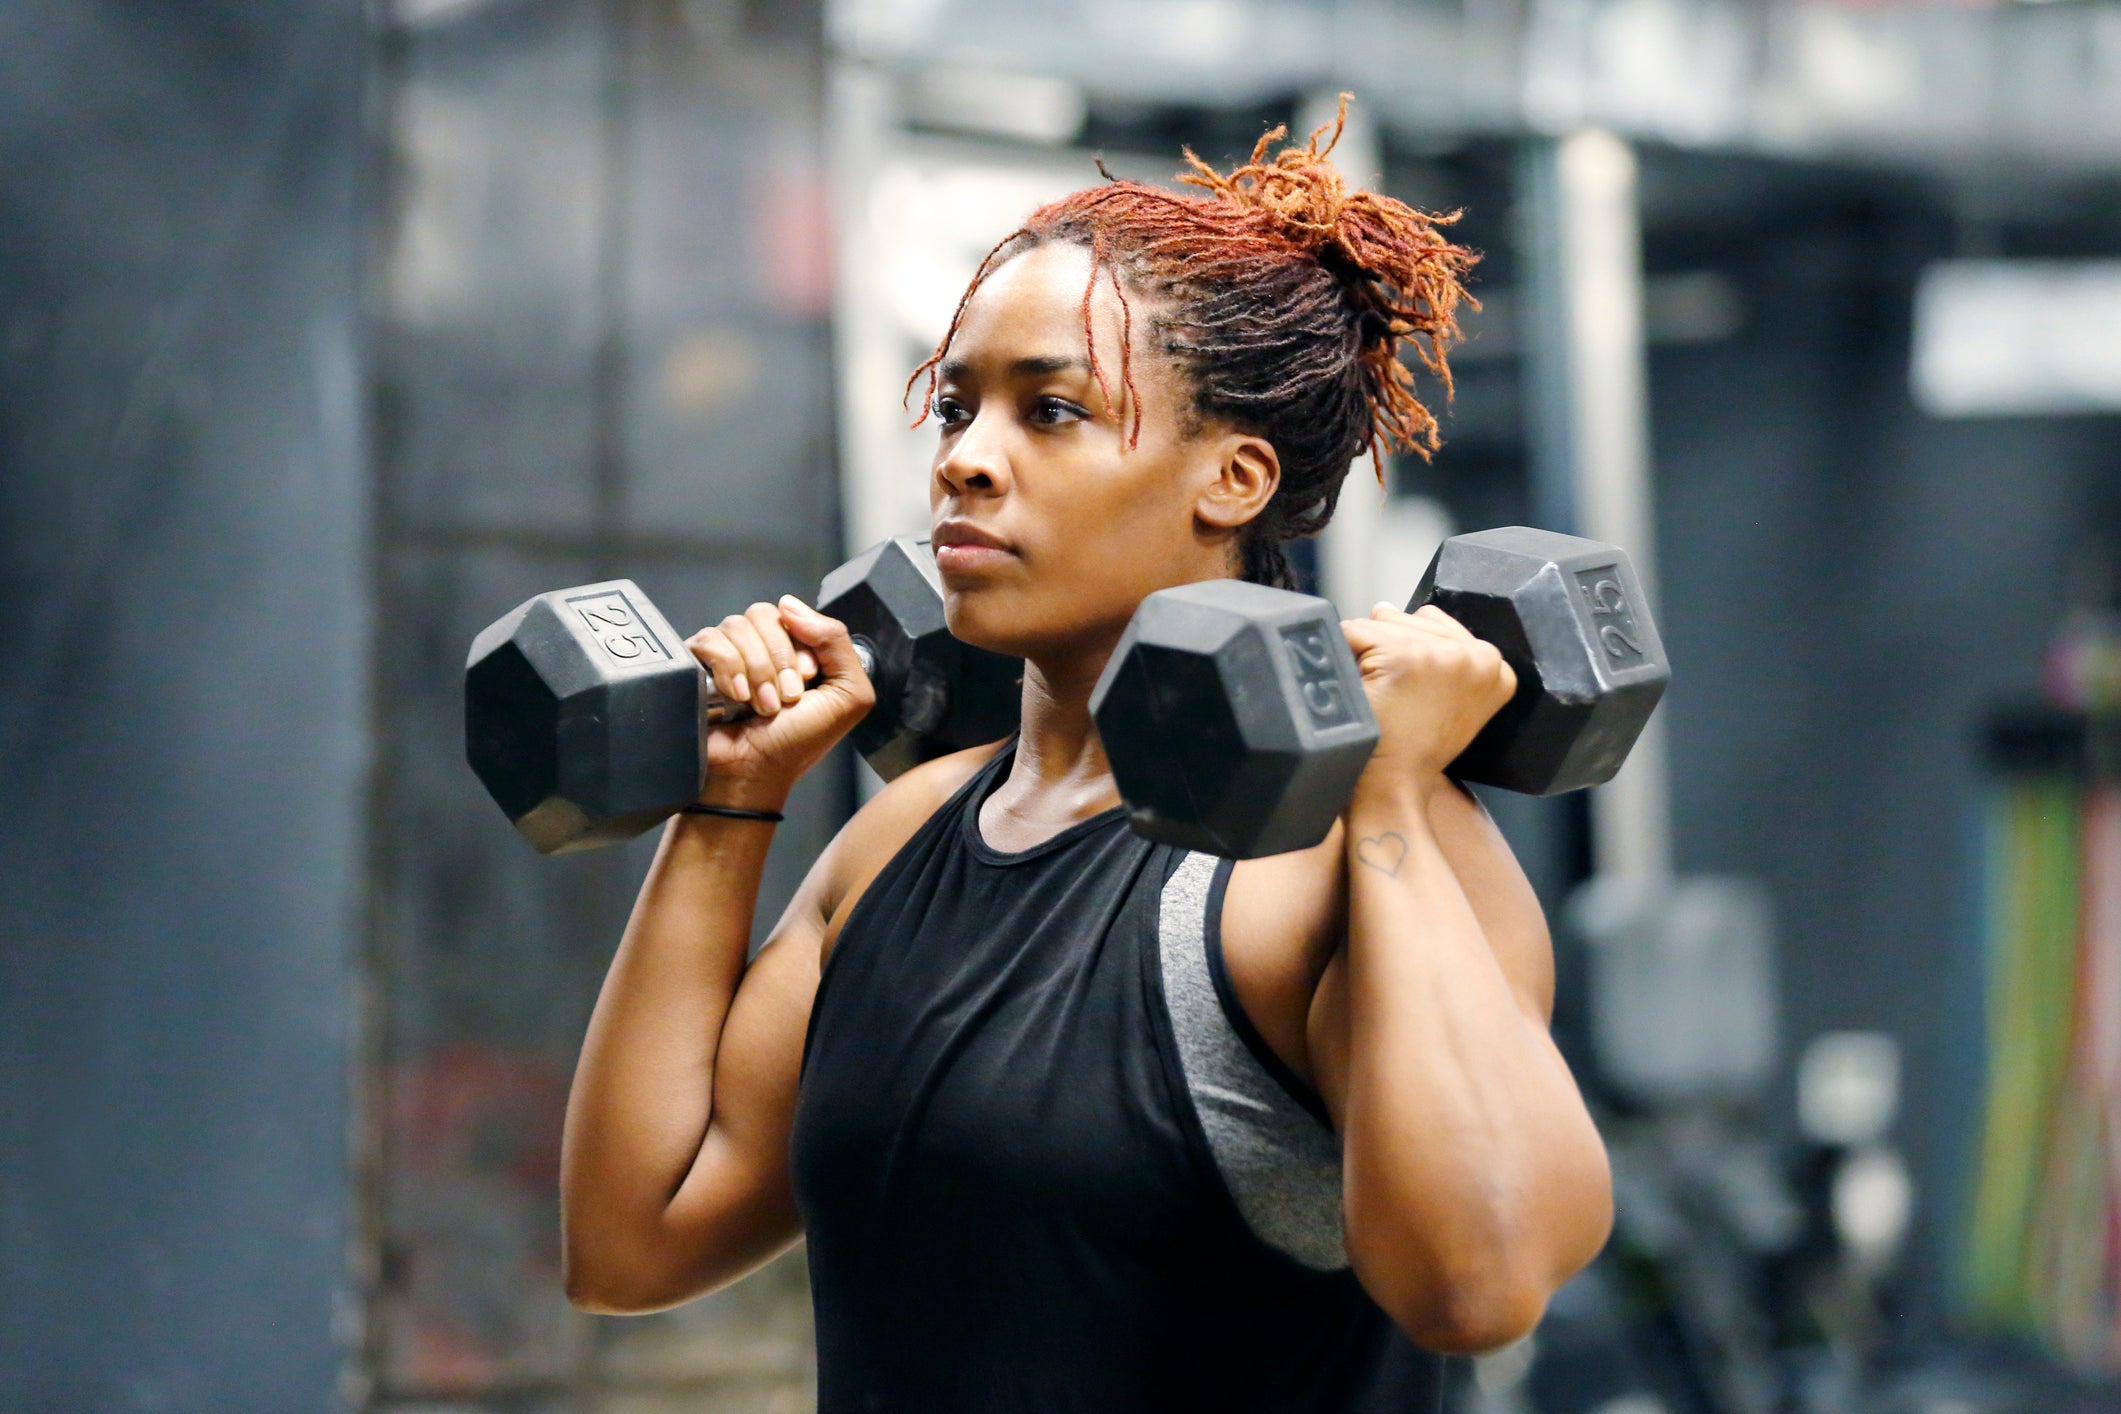 Weightlifting for Women: What Are the Benefits?
